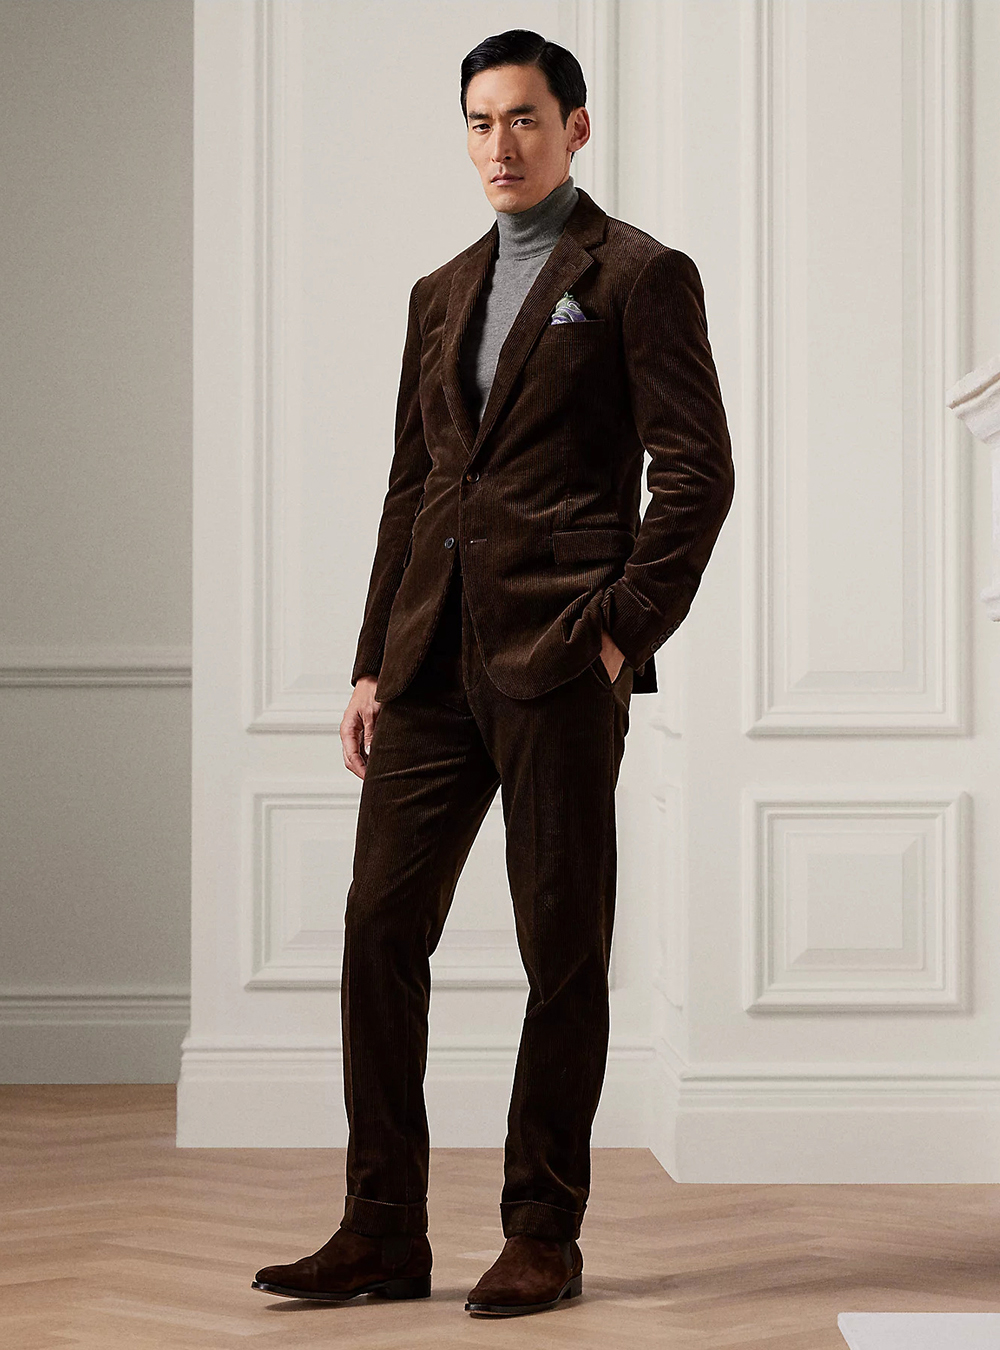 brown corduroy suit, grey turtleneck, and brown boots